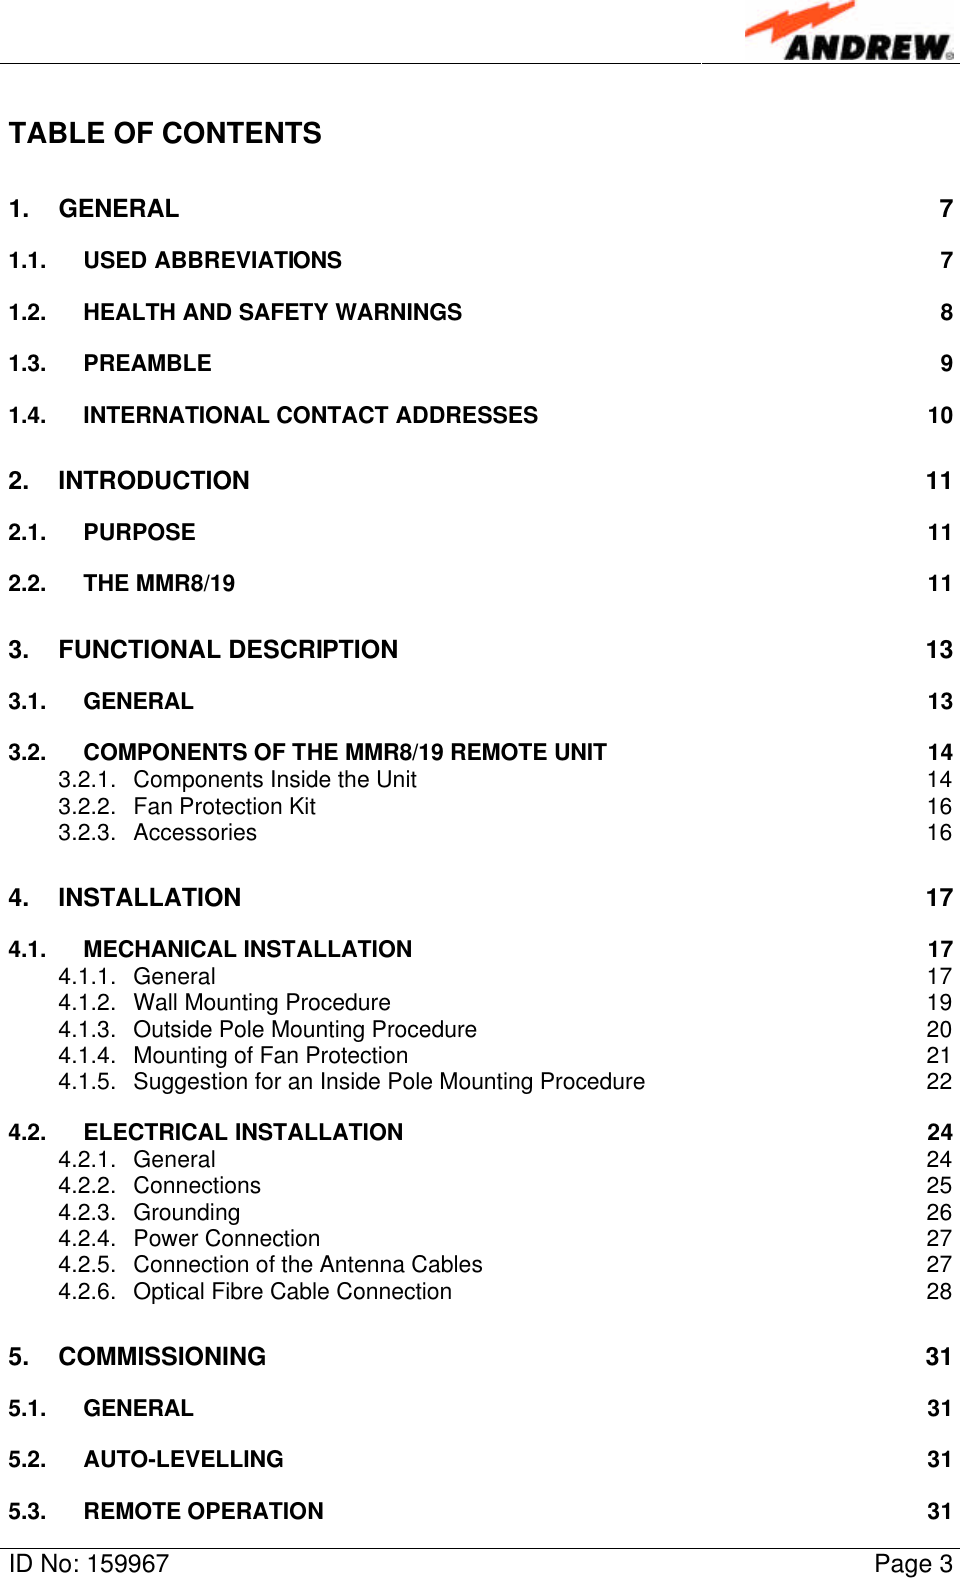 ID No: 159967 Page 3TABLE OF CONTENTS1. GENERAL 71.1. USED ABBREVIATIONS 71.2. HEALTH AND SAFETY WARNINGS 81.3. PREAMBLE 91.4. INTERNATIONAL CONTACT ADDRESSES 102. INTRODUCTION 112.1. PURPOSE 112.2. THE MMR8/19 113. FUNCTIONAL DESCRIPTION 133.1. GENERAL 133.2. COMPONENTS OF THE MMR8/19 REMOTE UNIT 143.2.1. Components Inside the Unit 143.2.2. Fan Protection Kit 163.2.3. Accessories 164. INSTALLATION 174.1. MECHANICAL INSTALLATION 174.1.1. General 174.1.2. Wall Mounting Procedure 194.1.3. Outside Pole Mounting Procedure 204.1.4. Mounting of Fan Protection 214.1.5. Suggestion for an Inside Pole Mounting Procedure 224.2. ELECTRICAL INSTALLATION 244.2.1. General 244.2.2. Connections 254.2.3. Grounding 264.2.4. Power Connection 274.2.5. Connection of the Antenna Cables 274.2.6. Optical Fibre Cable Connection 285. COMMISSIONING 315.1. GENERAL 315.2. AUTO-LEVELLING 315.3. REMOTE OPERATION31